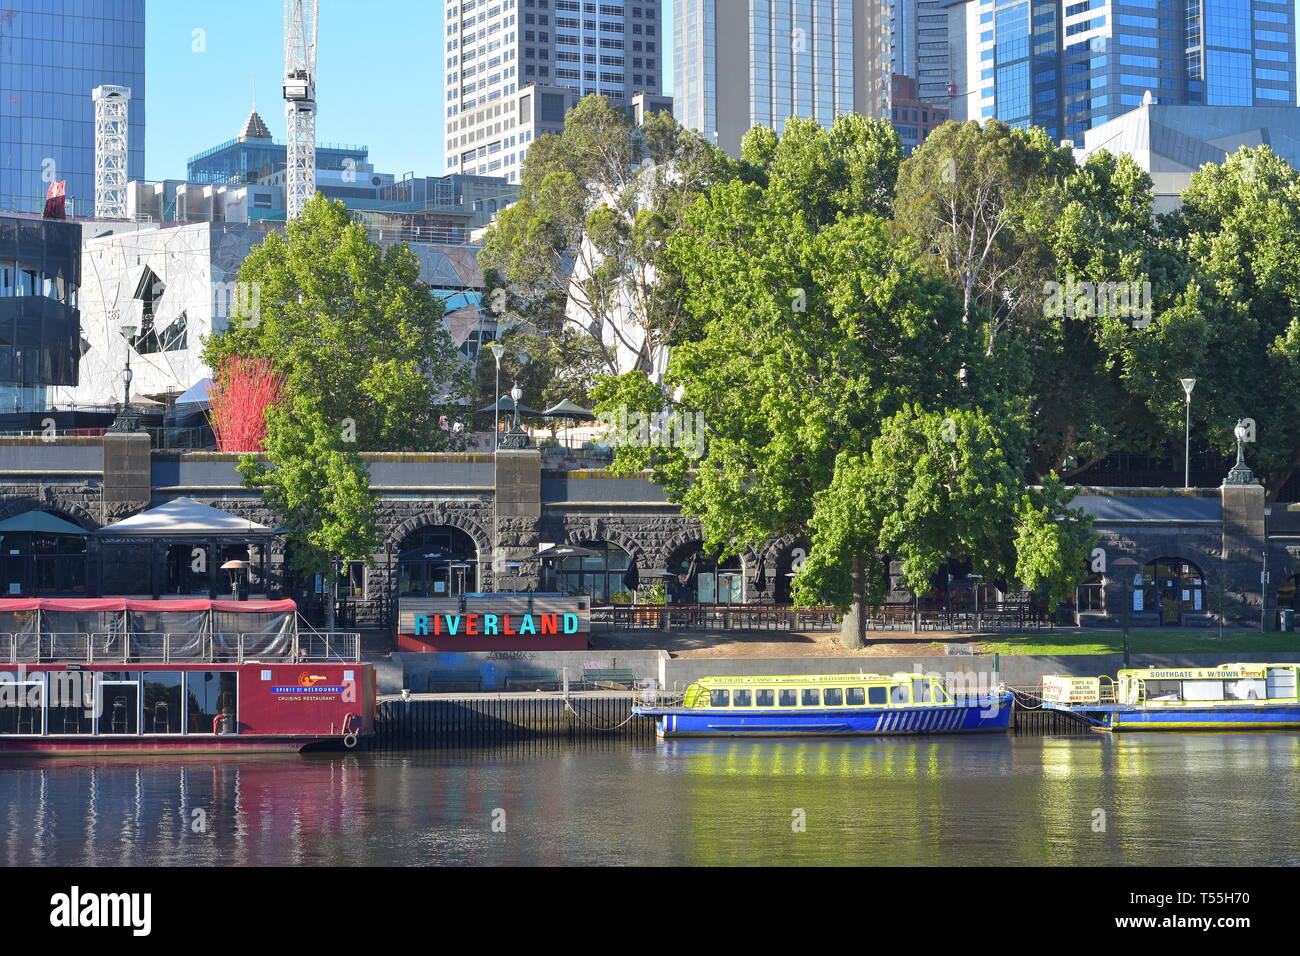 Riverland bar and cafe on bank of Yarra River where tourist cruise boats park with skyscrapers in background. Stock Photo